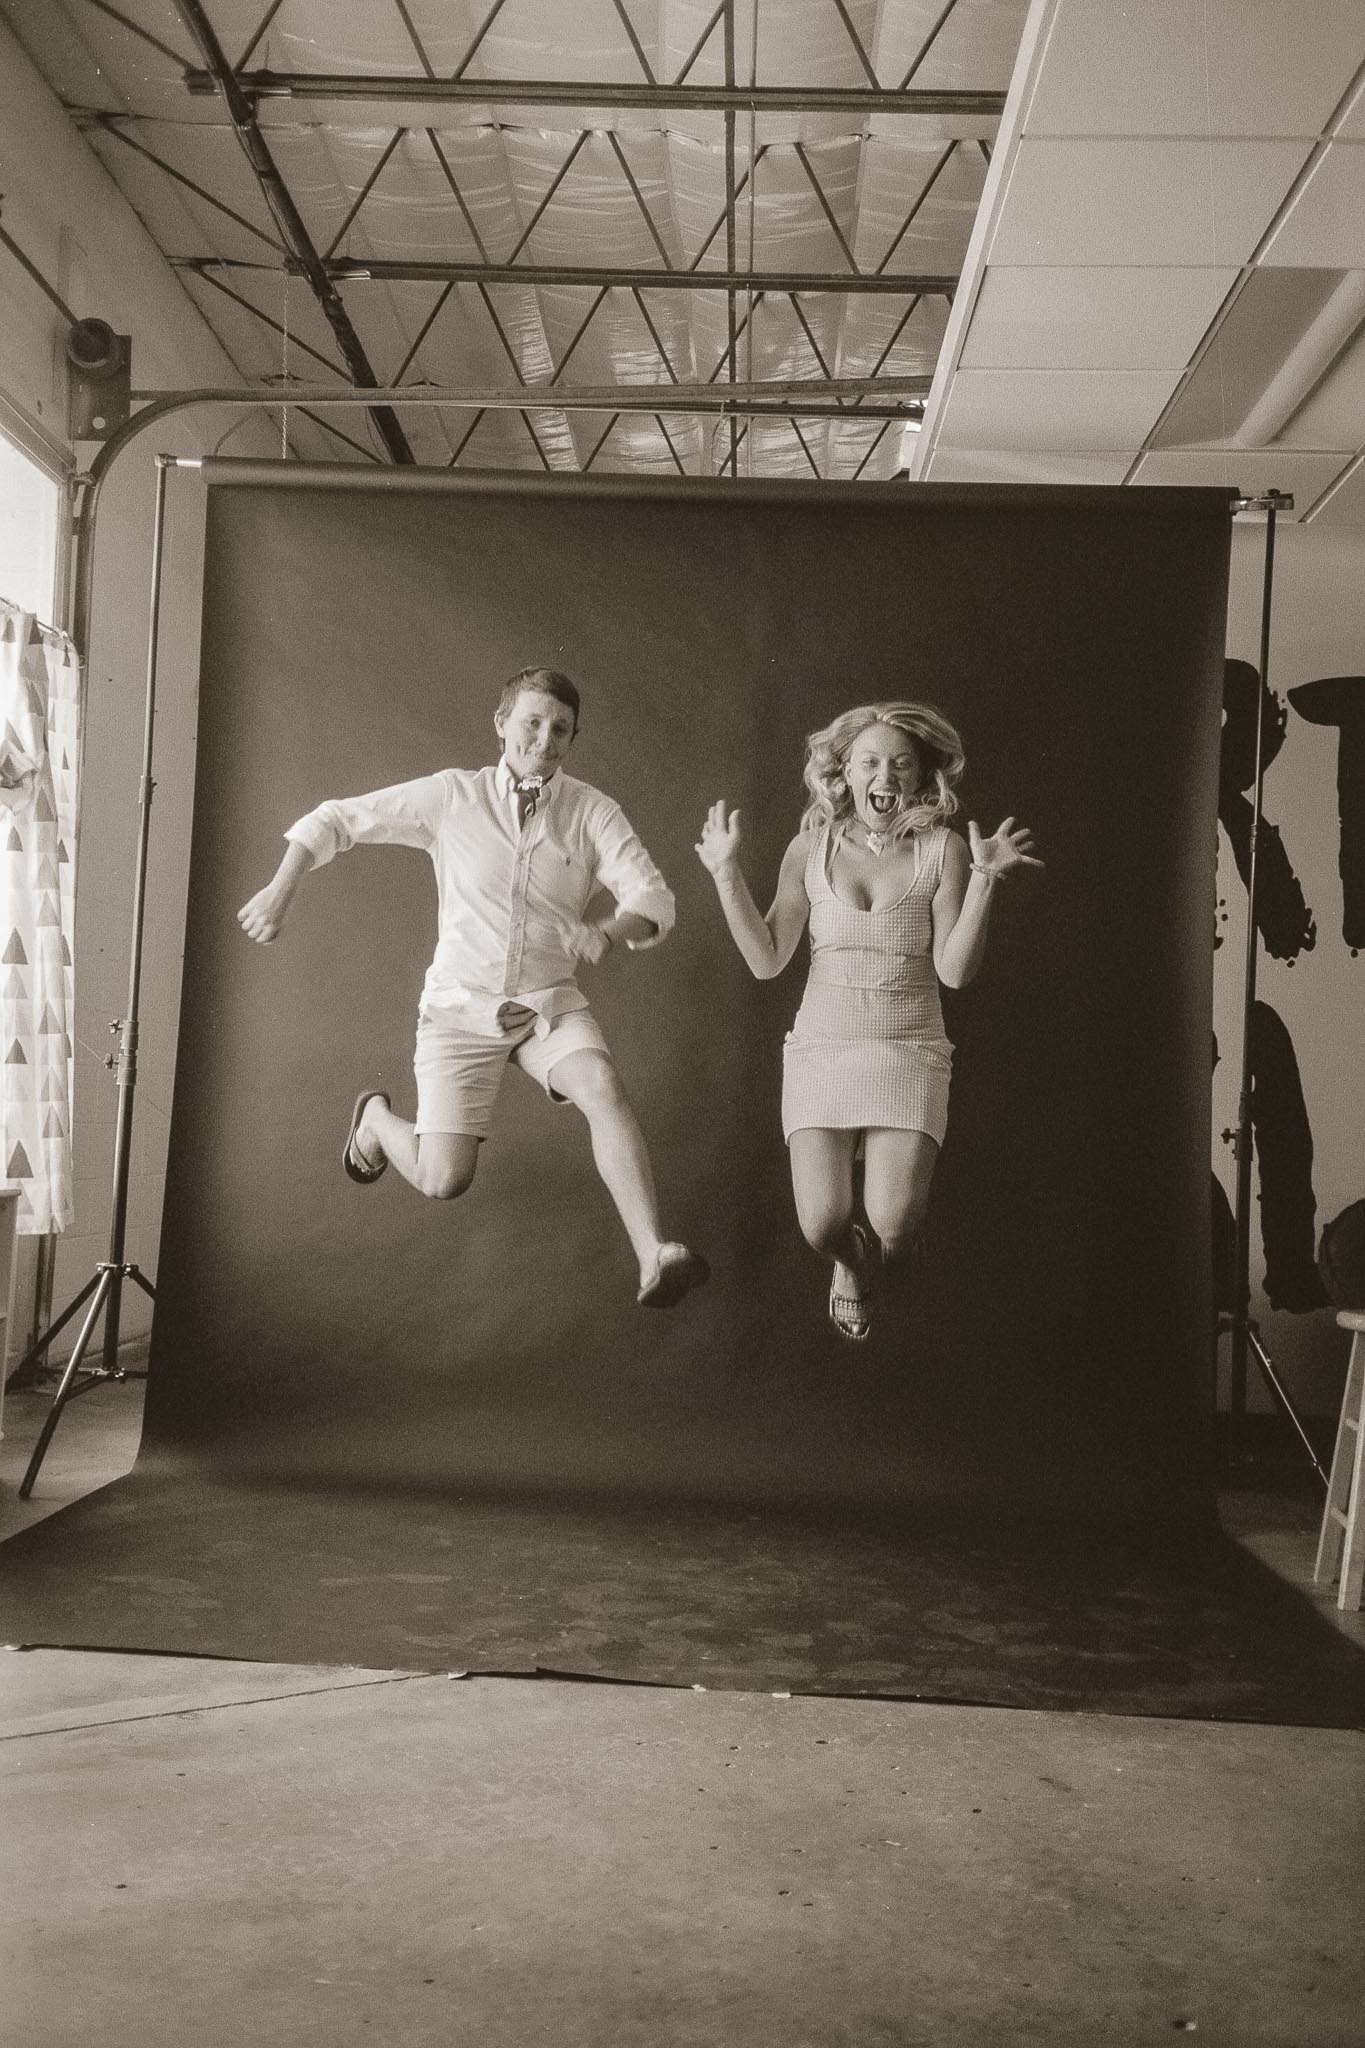 Guy and girl jumping in front of a studio backdrop